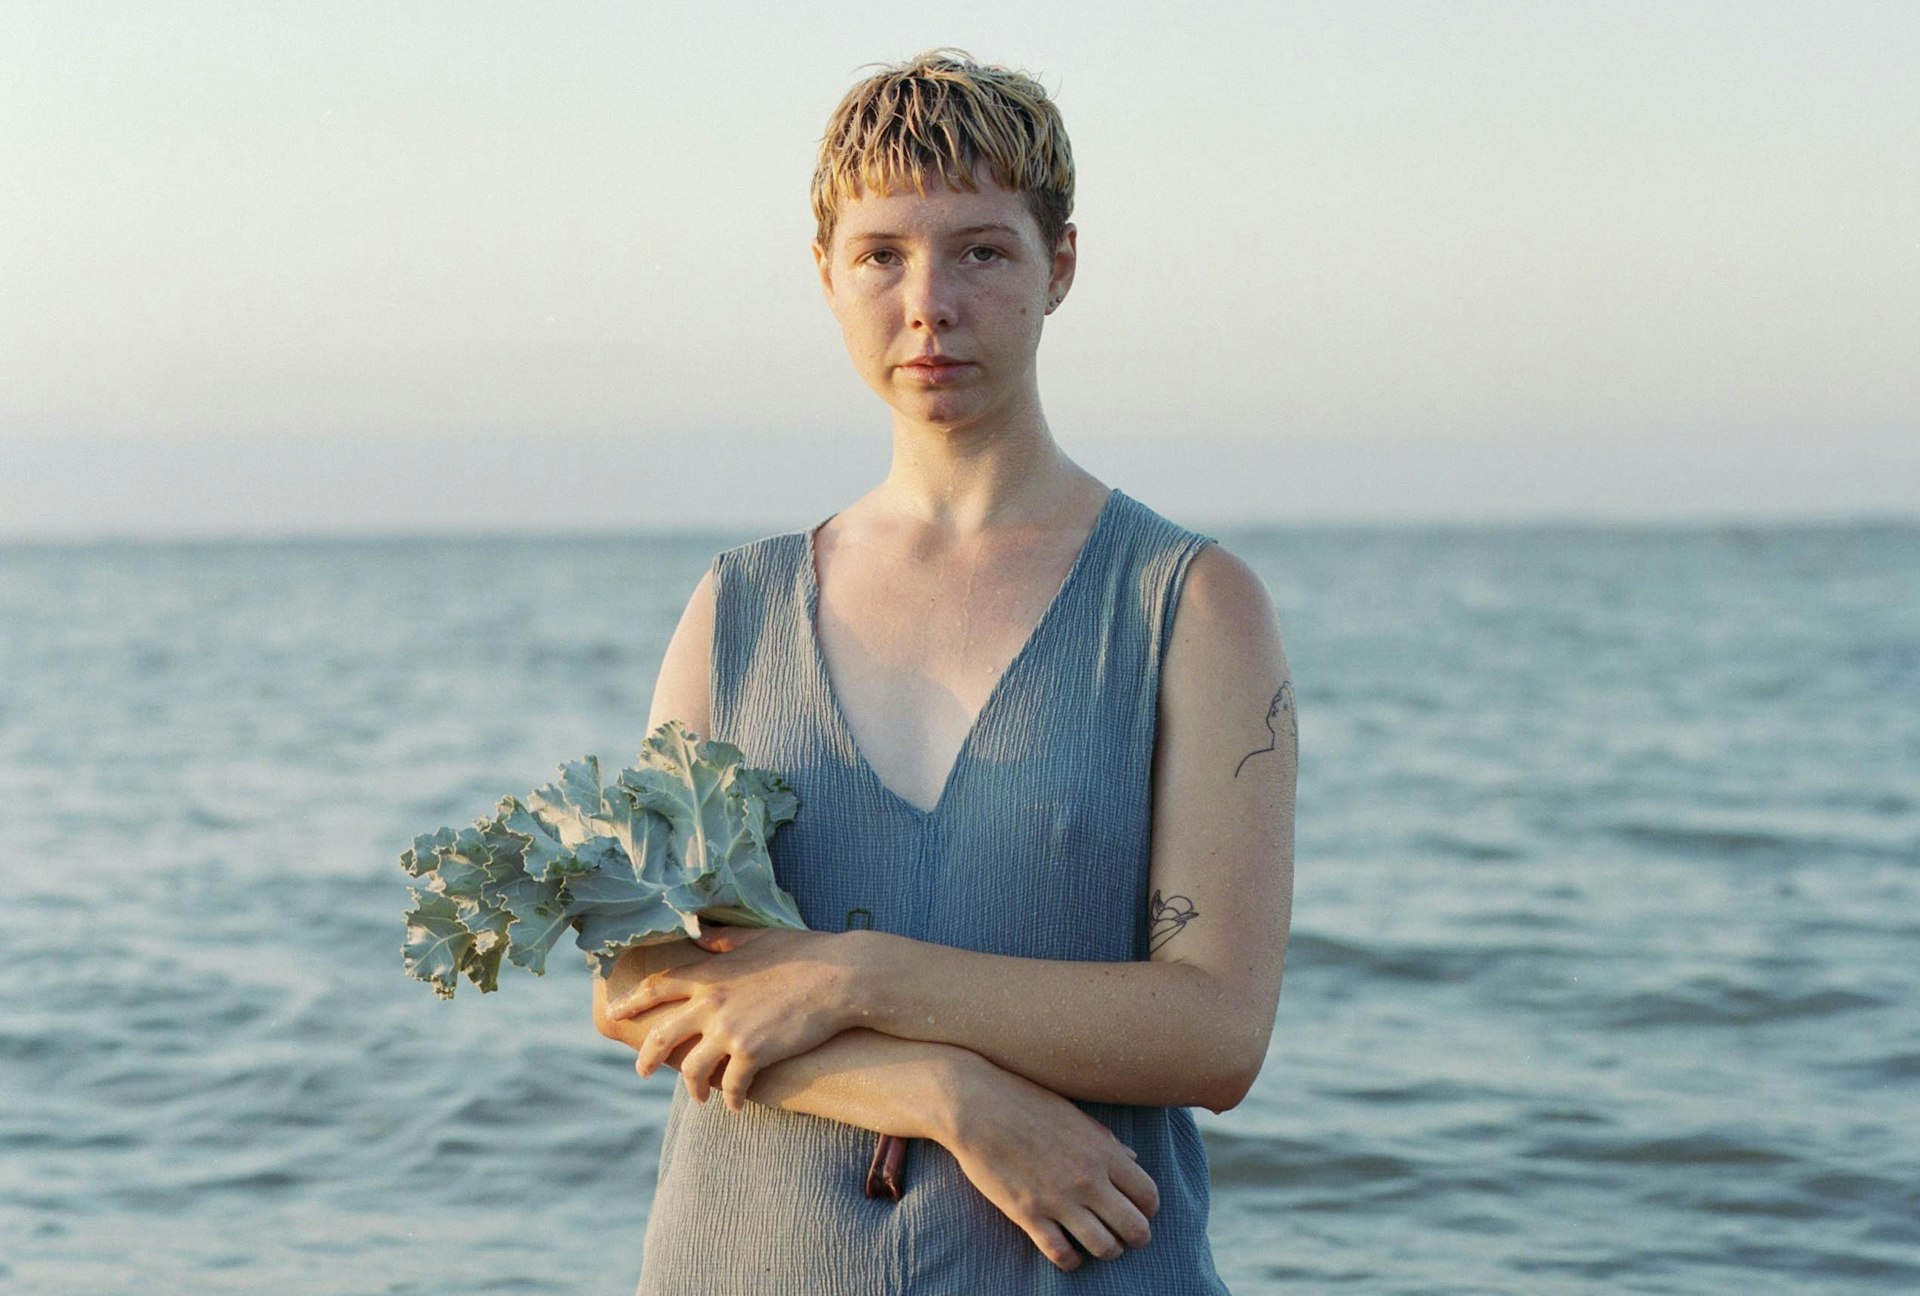 Dreamy photos of people seeking escape by the sea